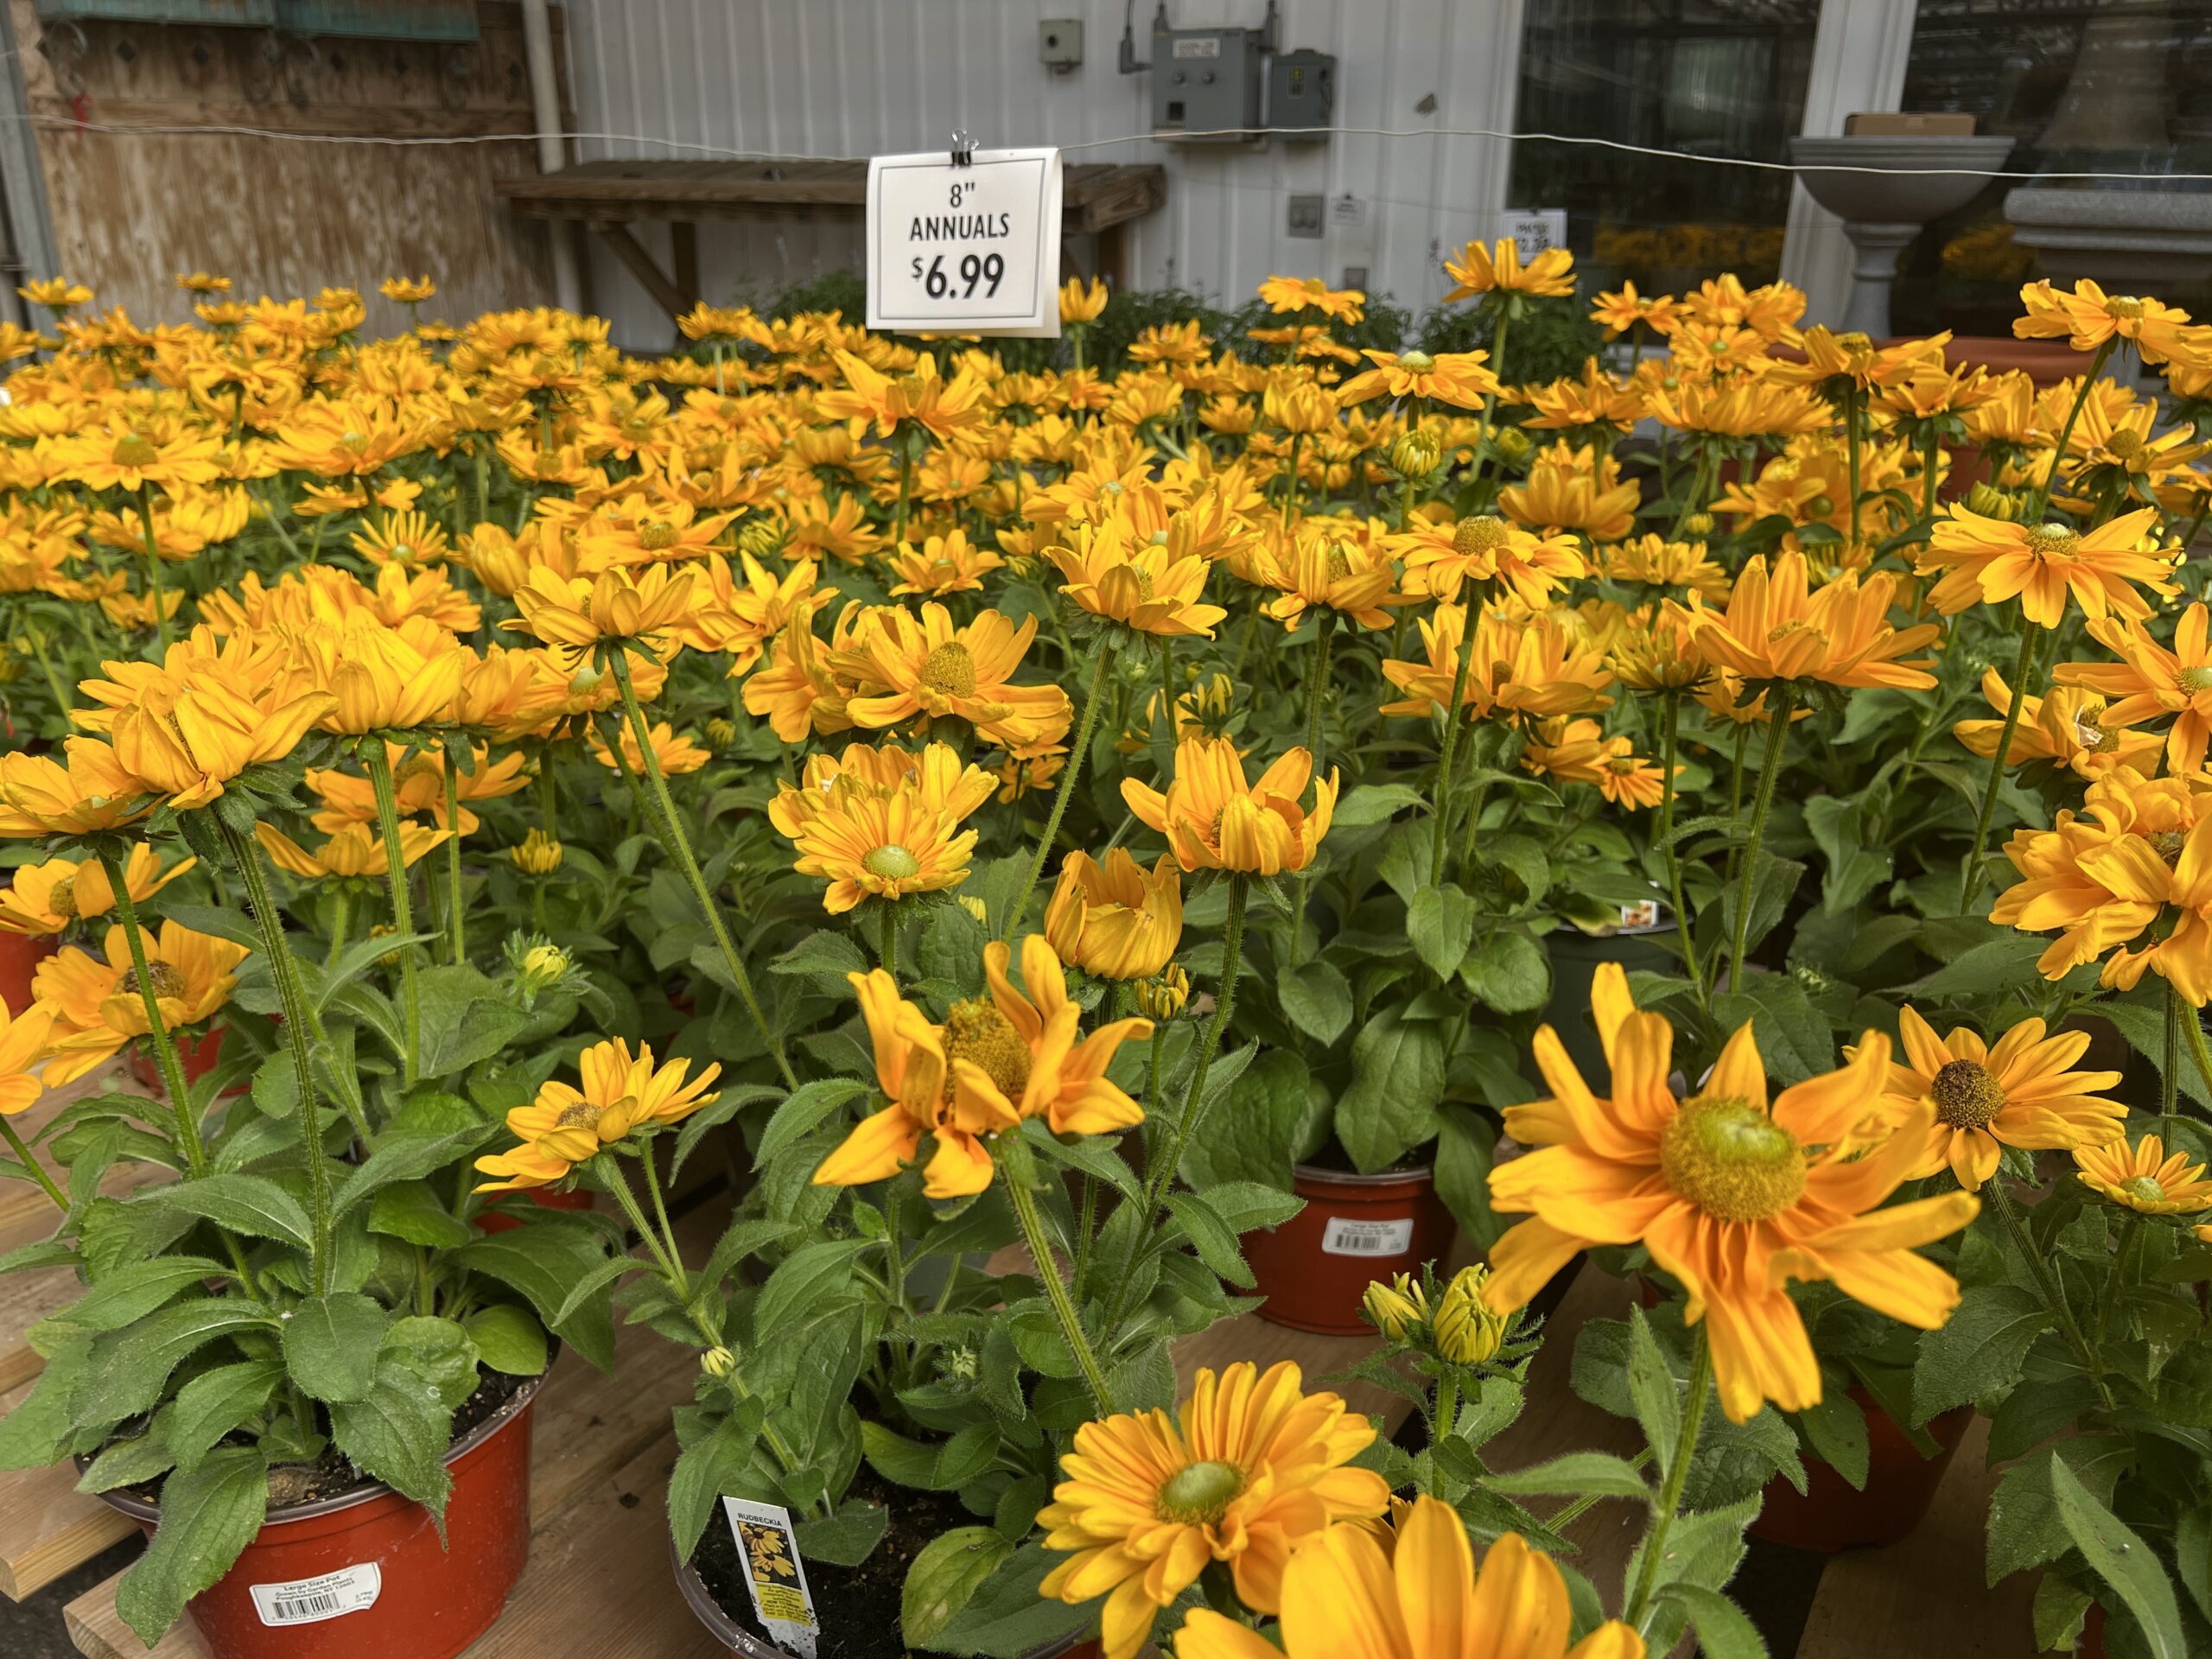 Annual type Rudbeckias for sale at a mass marketer.  These may drop seed but you never know what will result.  If they come back next year they’d be considered hardy annuals.  ANDREW MESSINGER